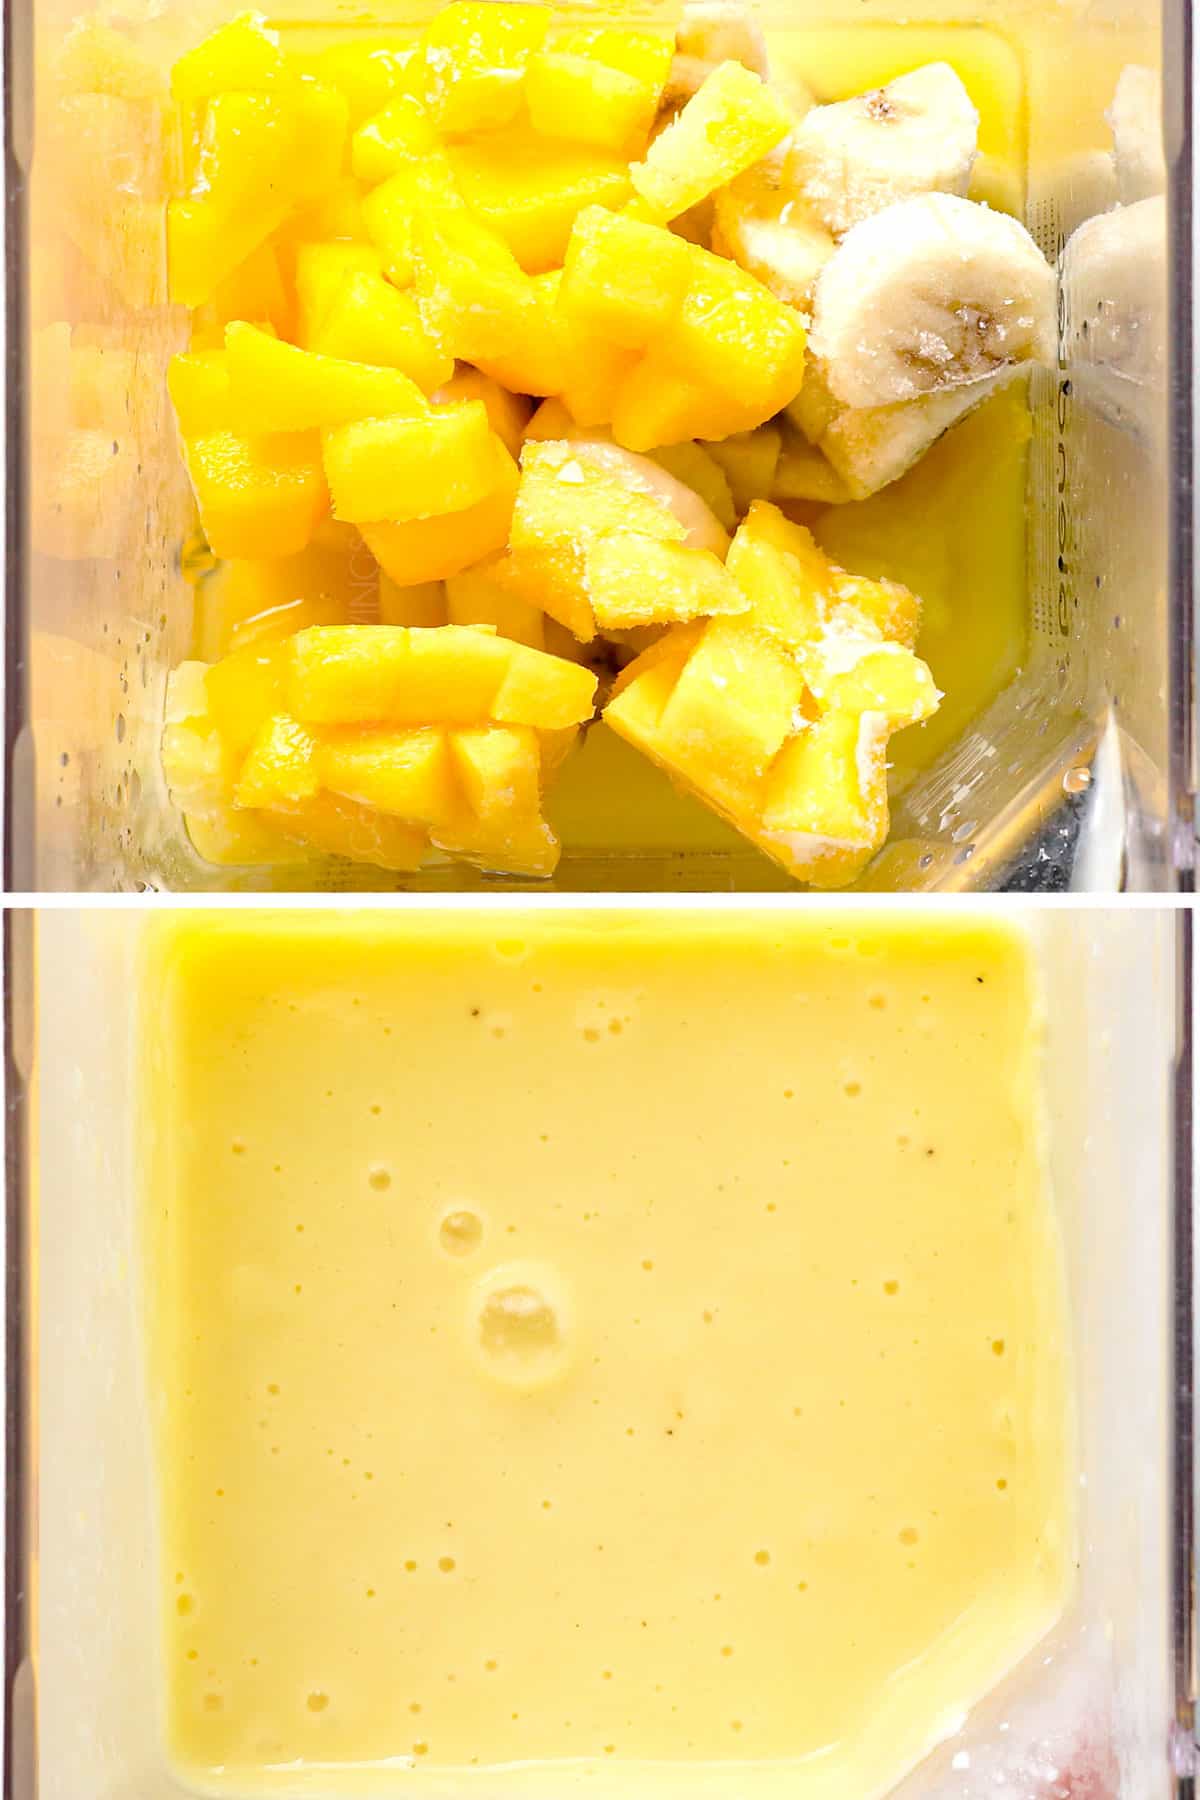 A collage showing how to make a smoothie recipe by blending fruit and liquid until smooth